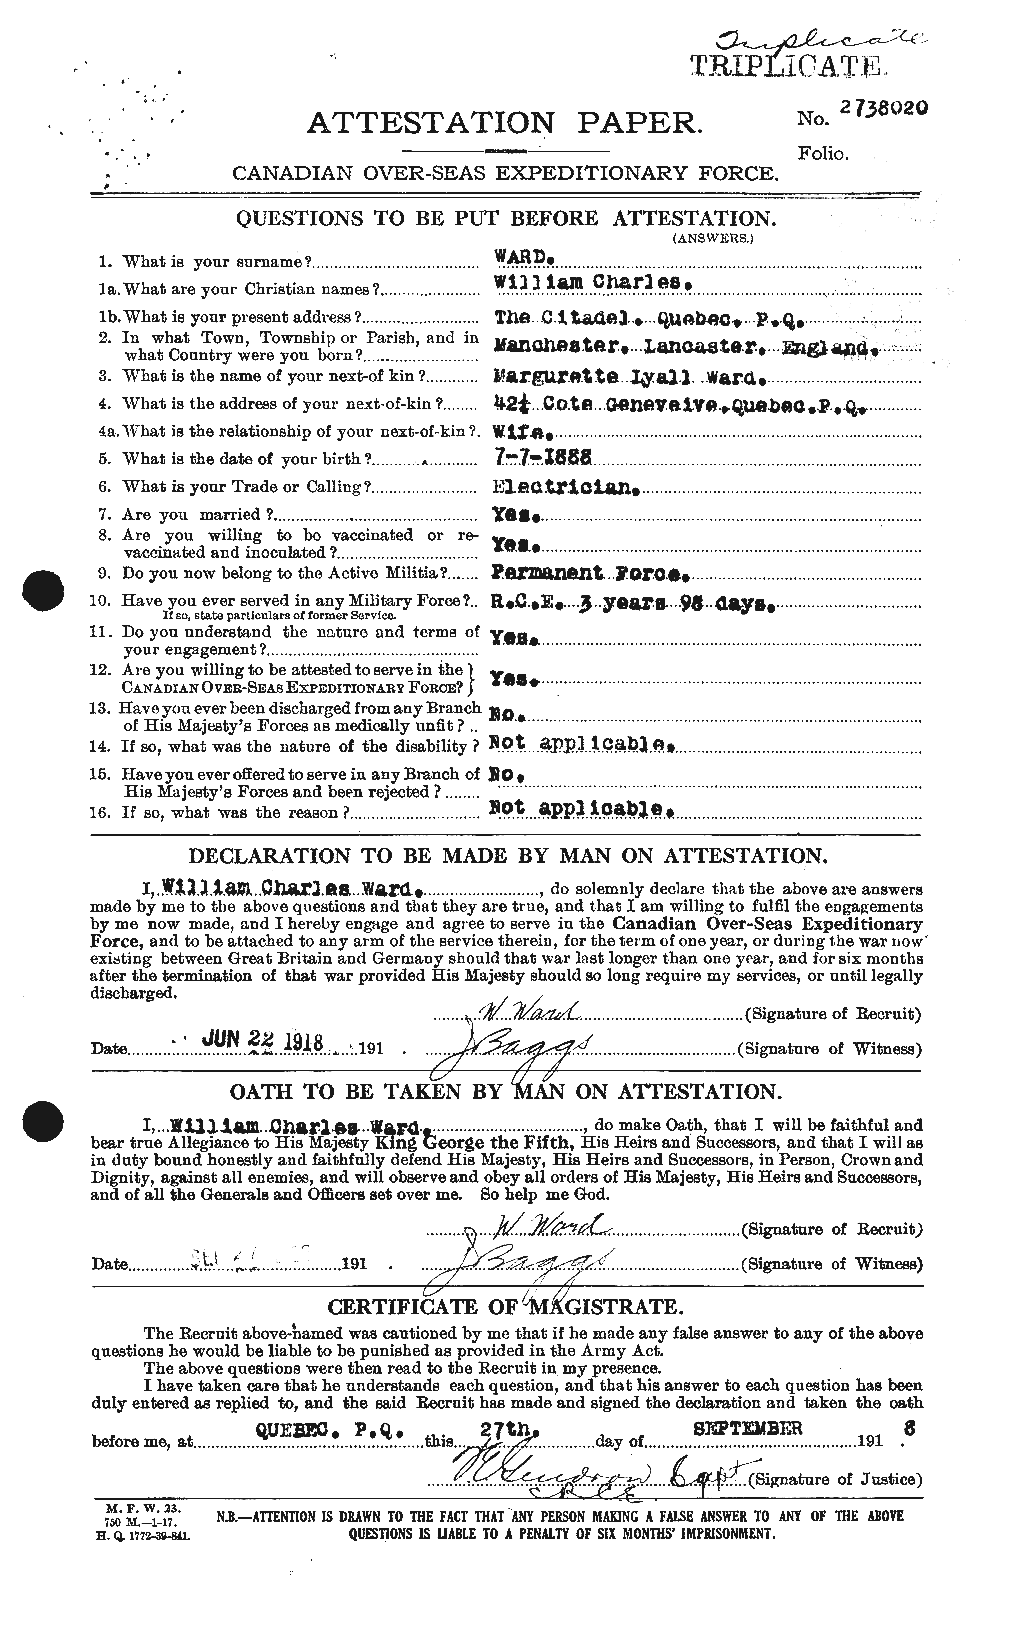 Personnel Records of the First World War - CEF 659807a